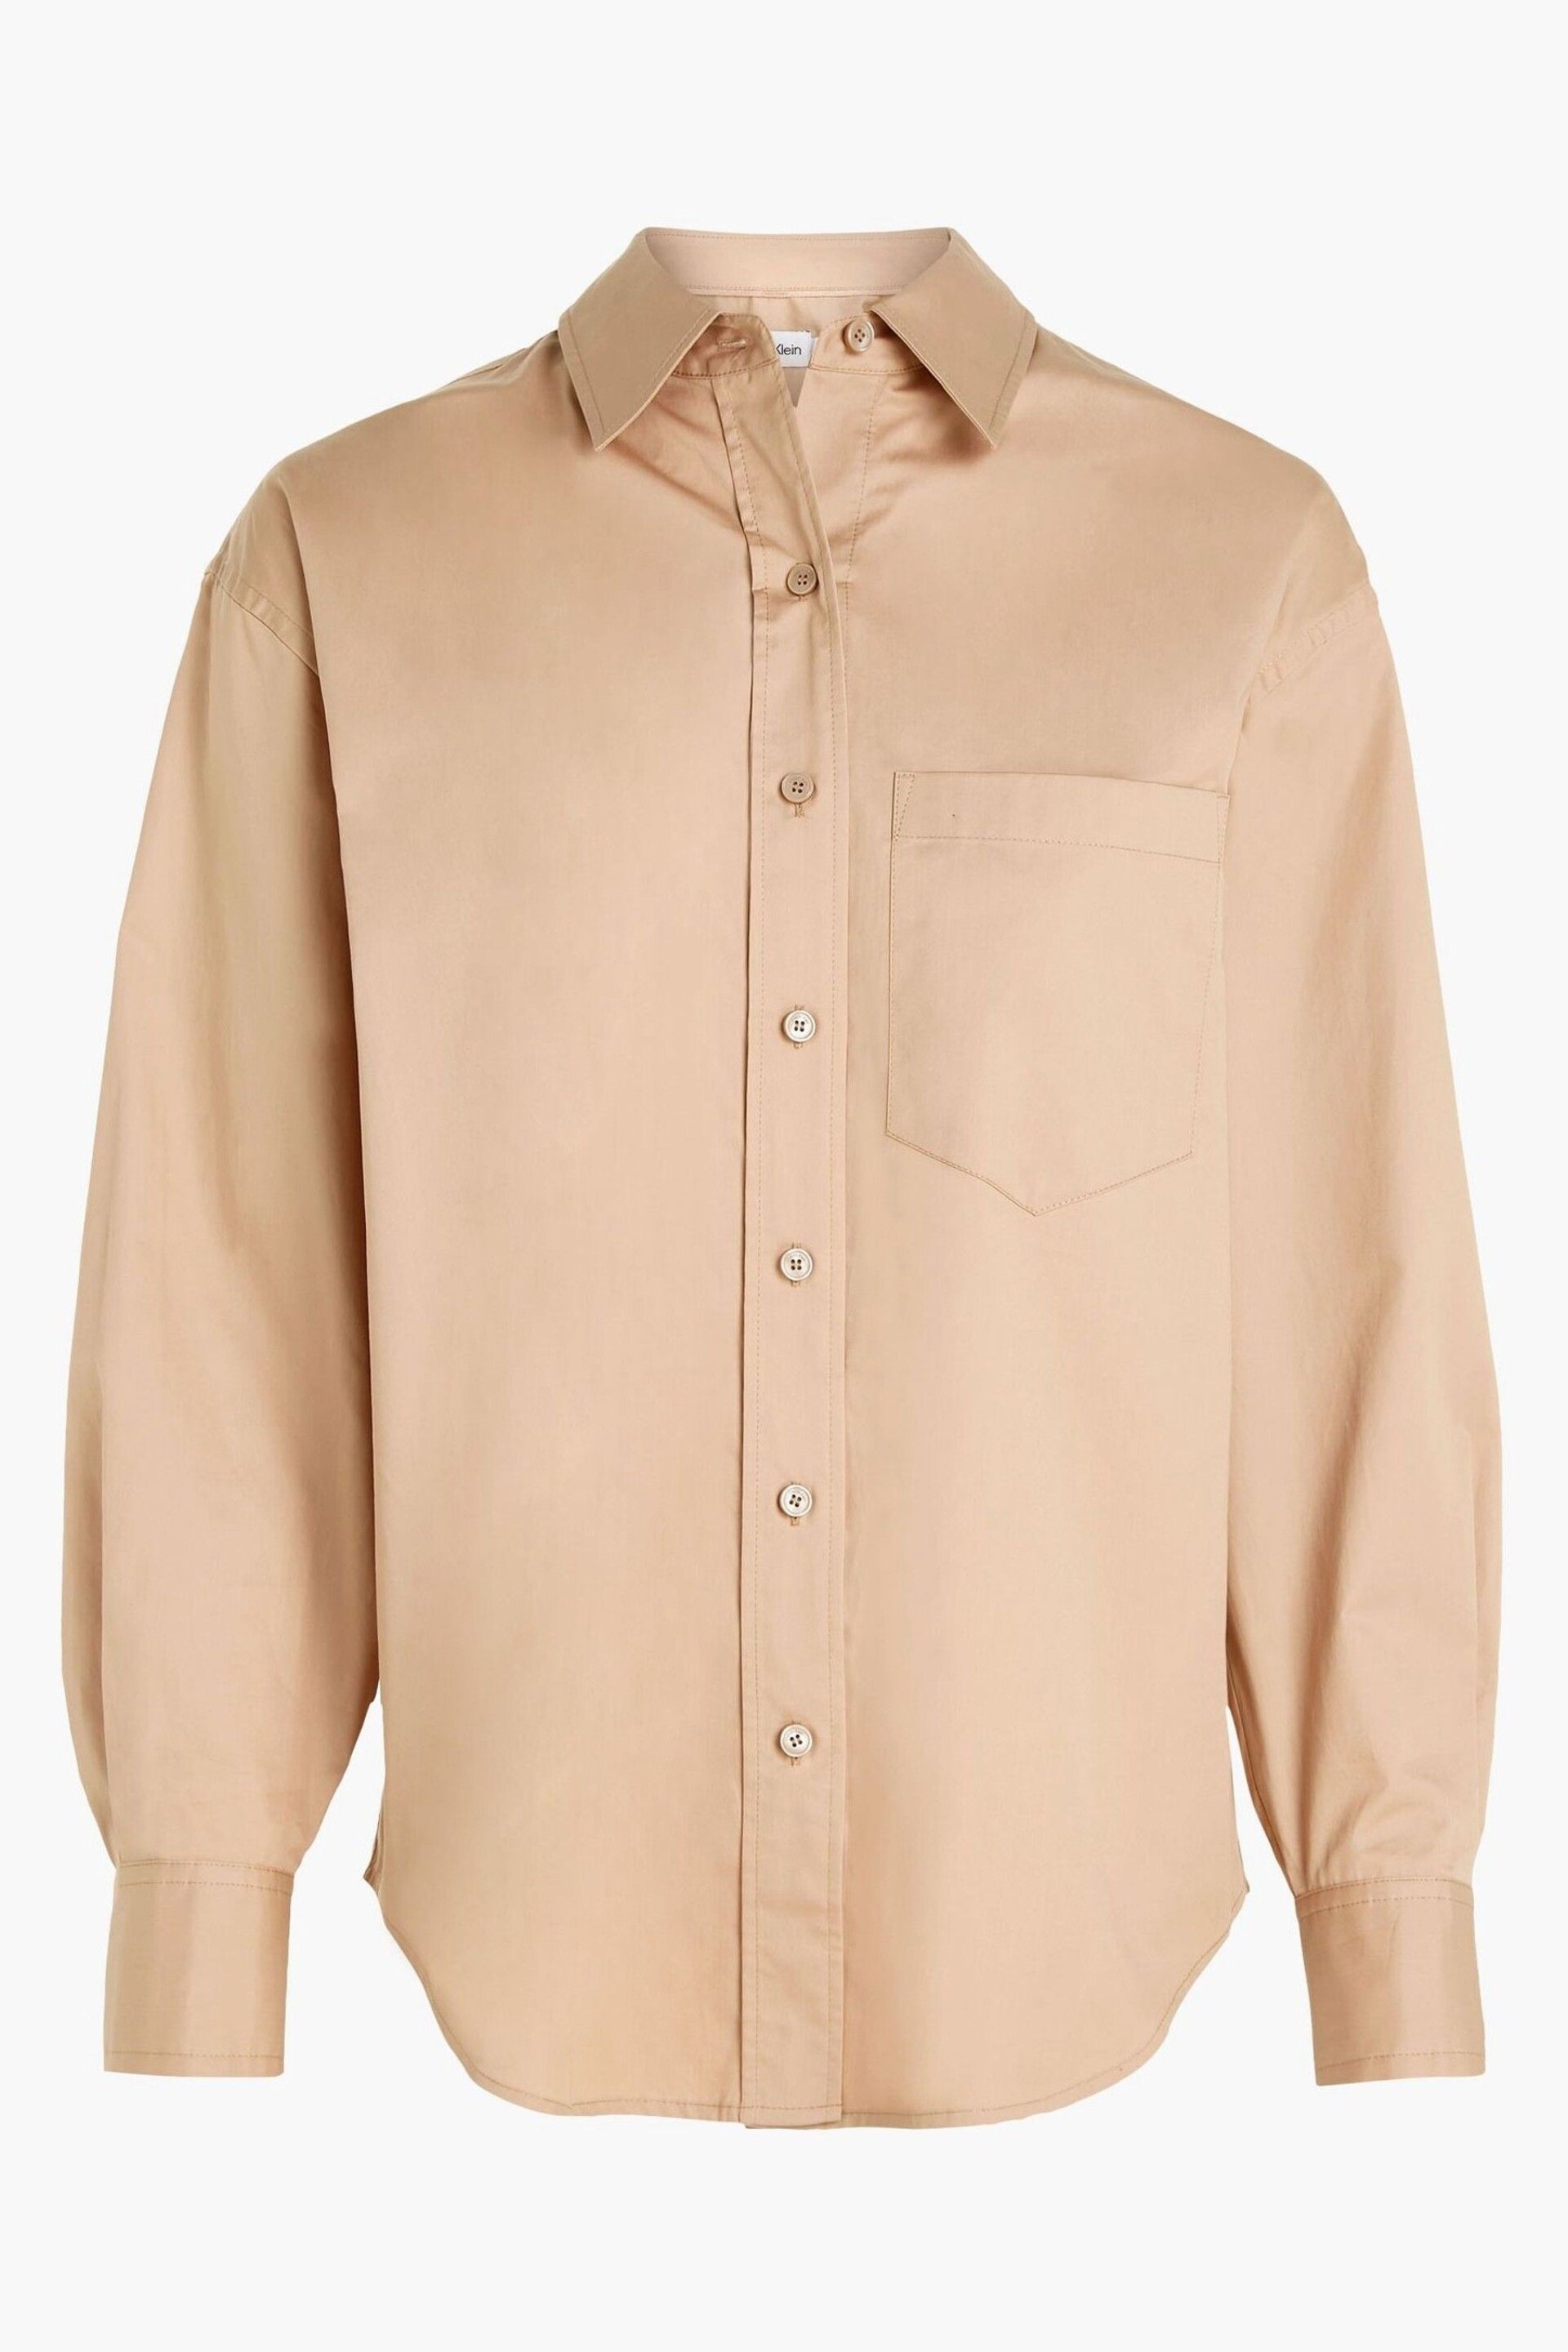 Calvin Klein Brown Relaxed Cotton Shirt - Image 4 of 4